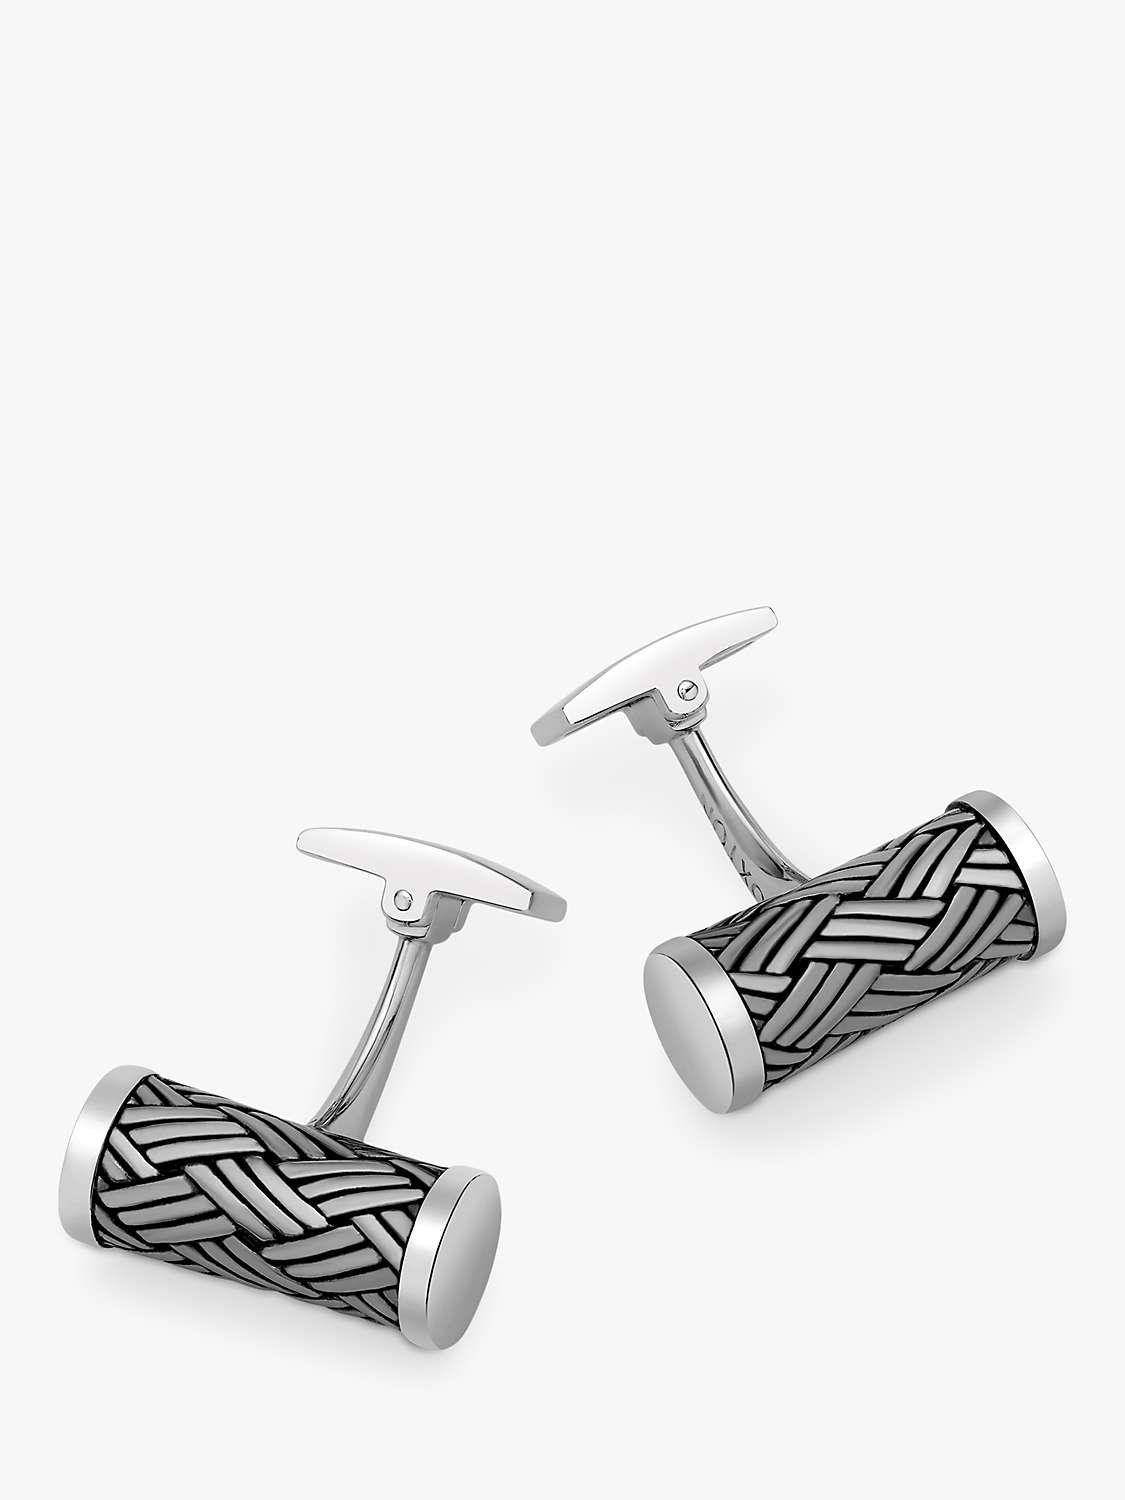 Buy Hoxton London Woven Pattern Cylinder Oxidised Cufflinks, Silver Online at johnlewis.com